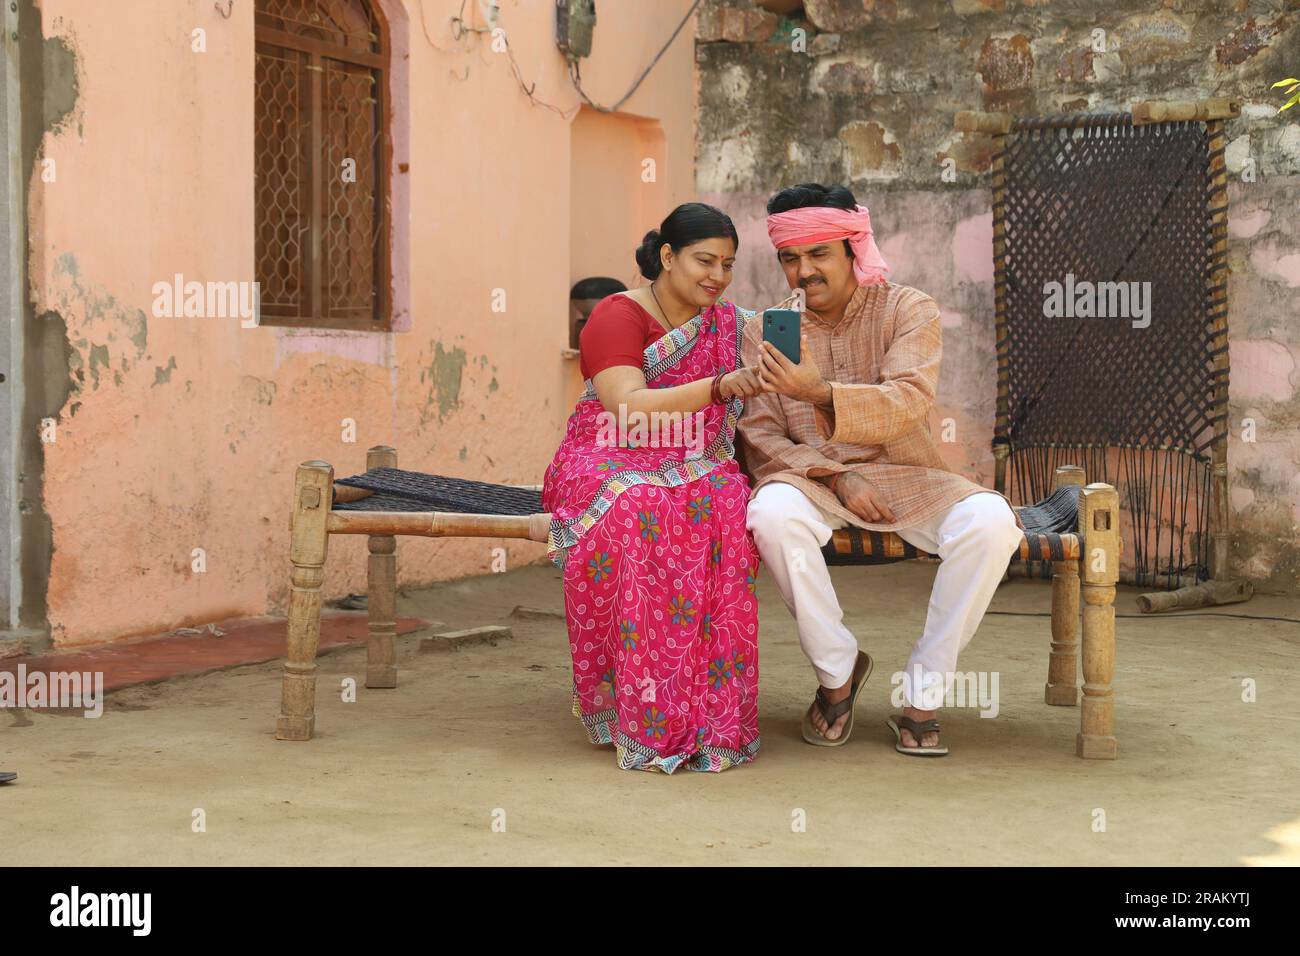 Portrait of Indian rural farmer couple sitting outdoors together in Indian villager's attire holding phone in hand. Stock Photo